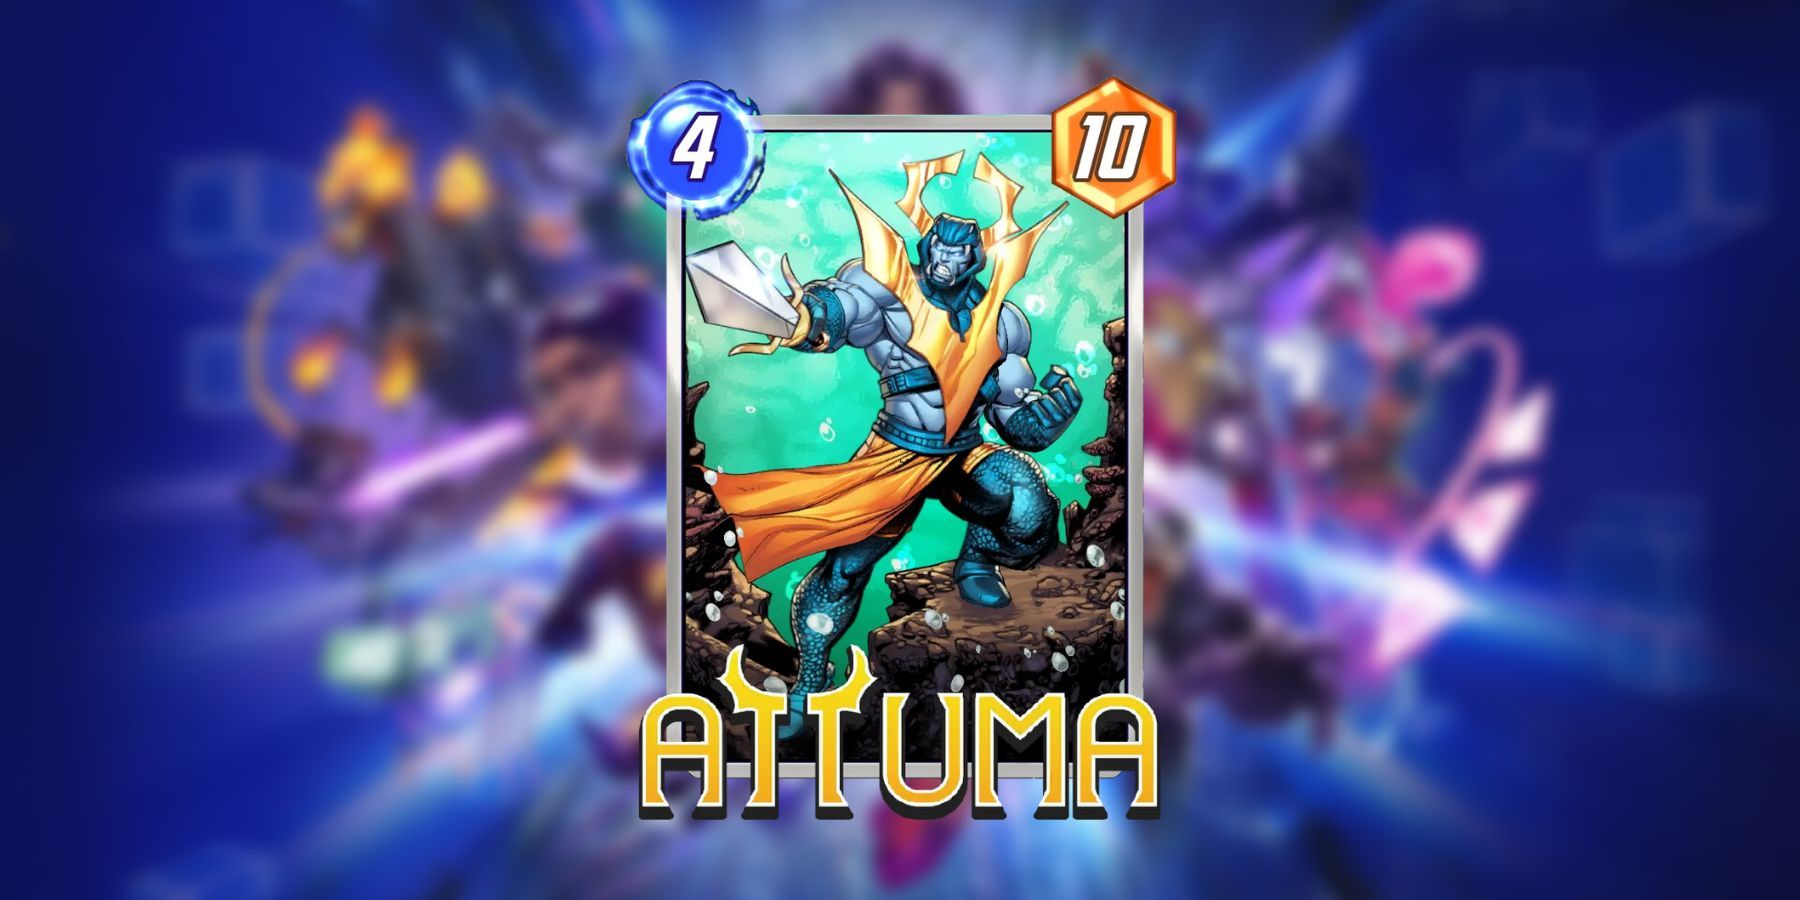 image showing the attuma card in marvel snap.